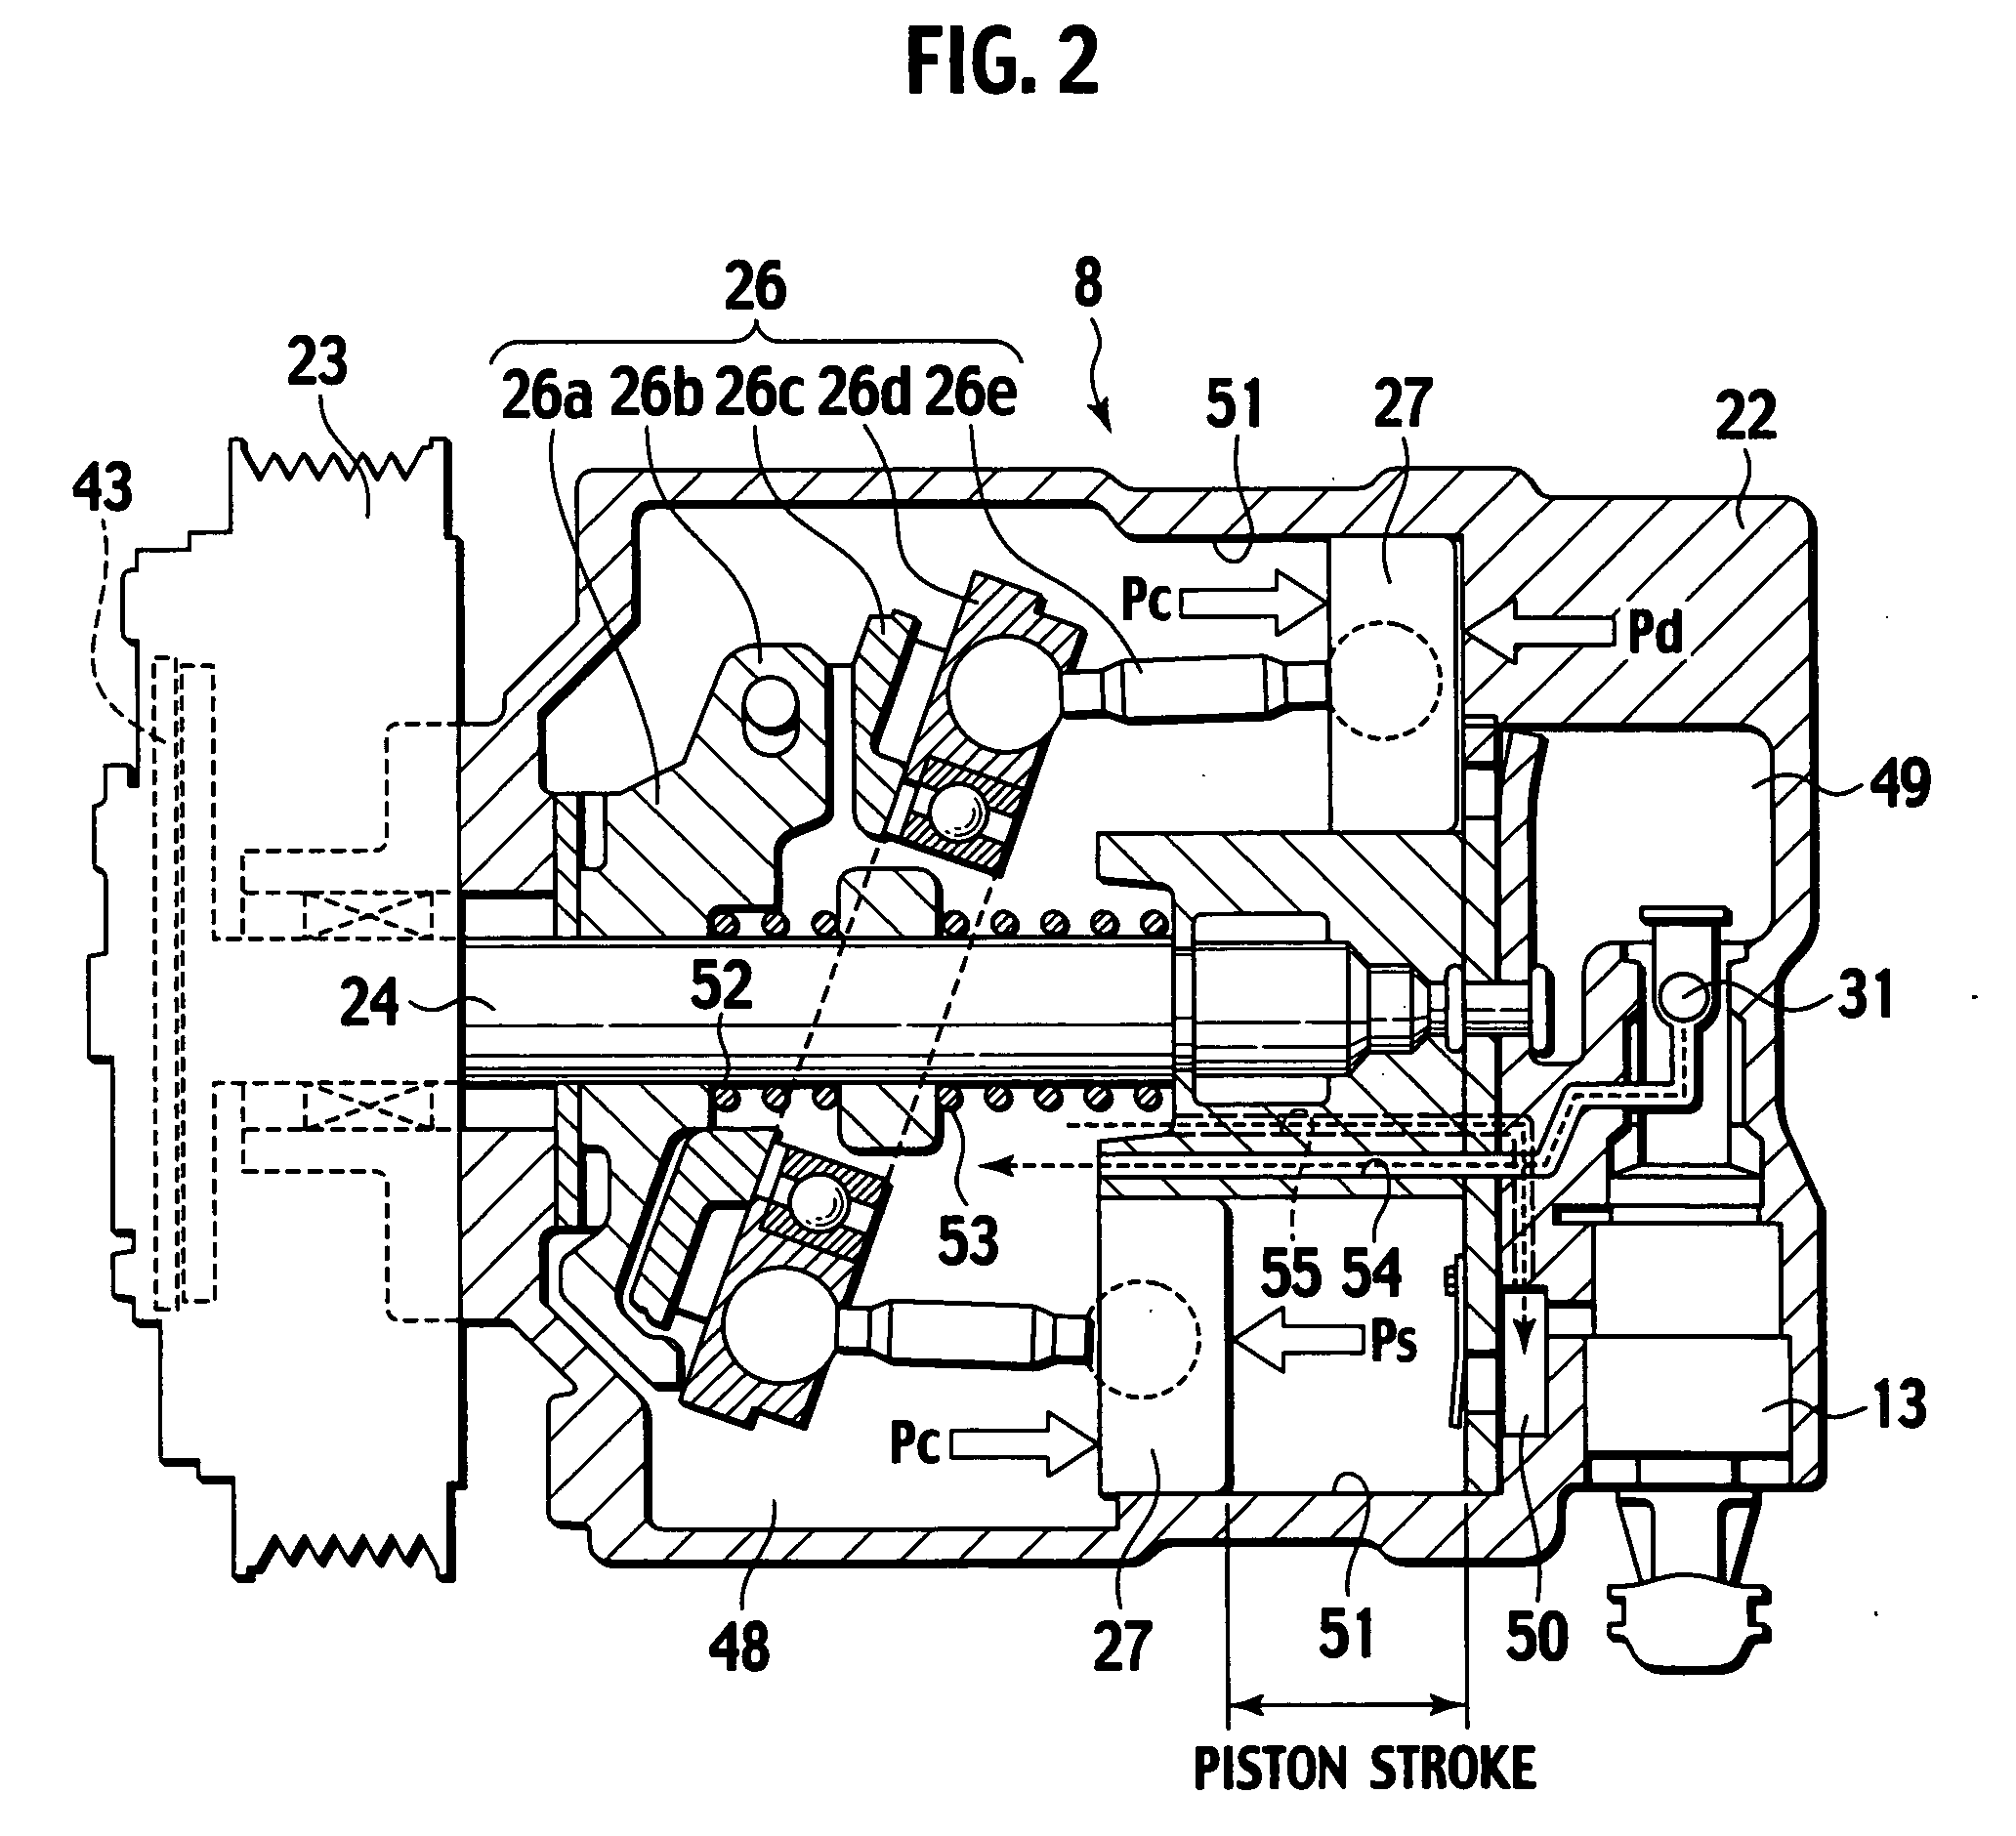 Apparatus for and method of calculating torque of variable capacity compressor